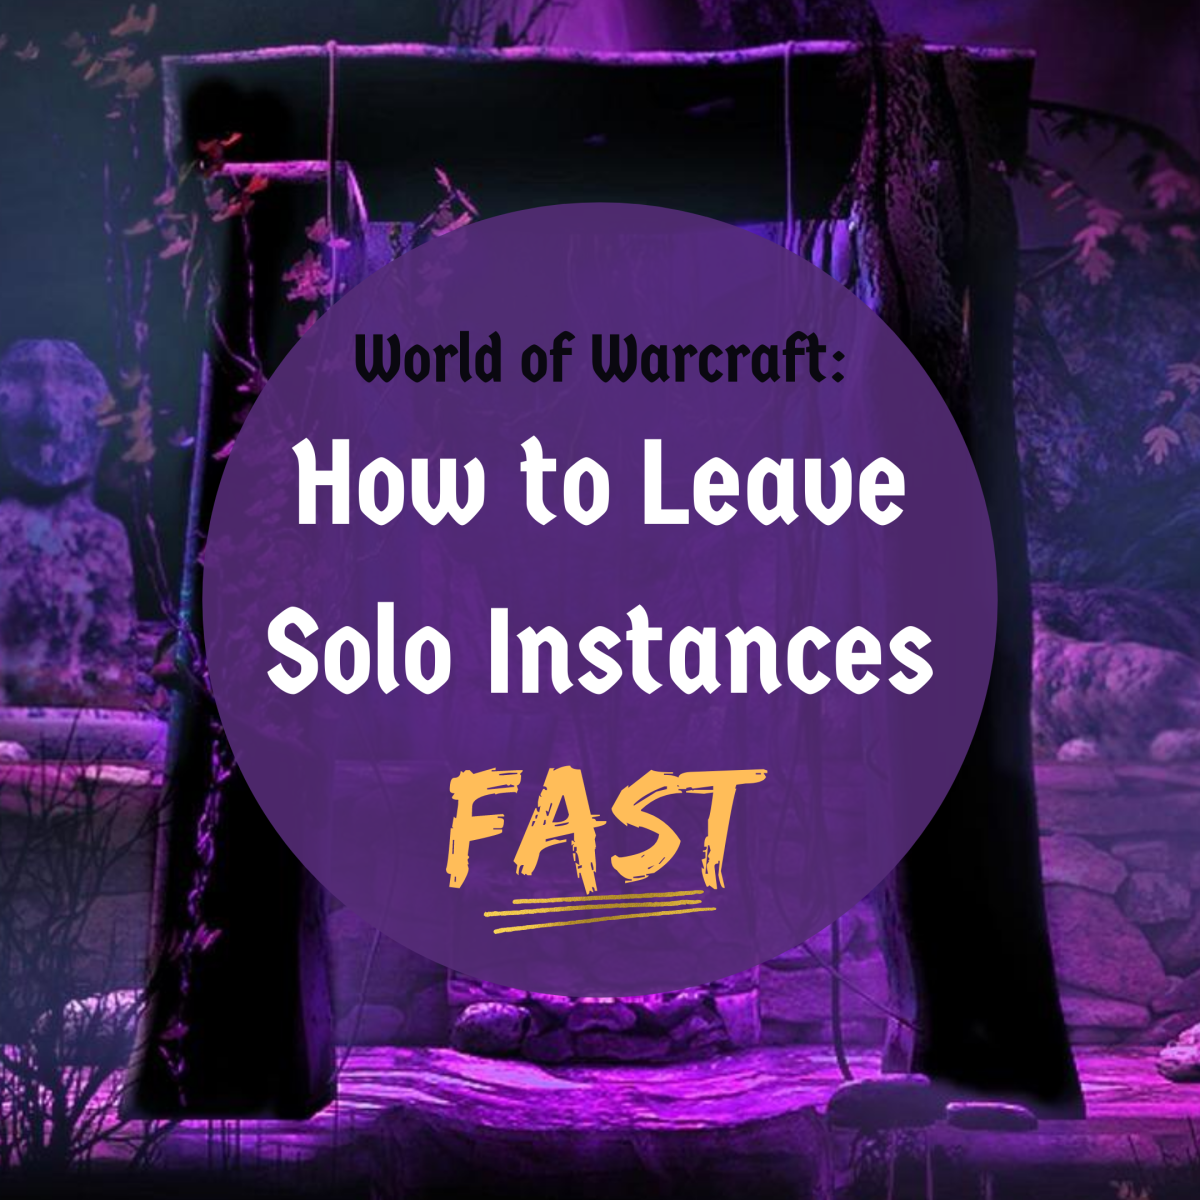 Discover three methods for leaving the instance quickly when you're running a solo dungeon or raid in "World of Warcraft."